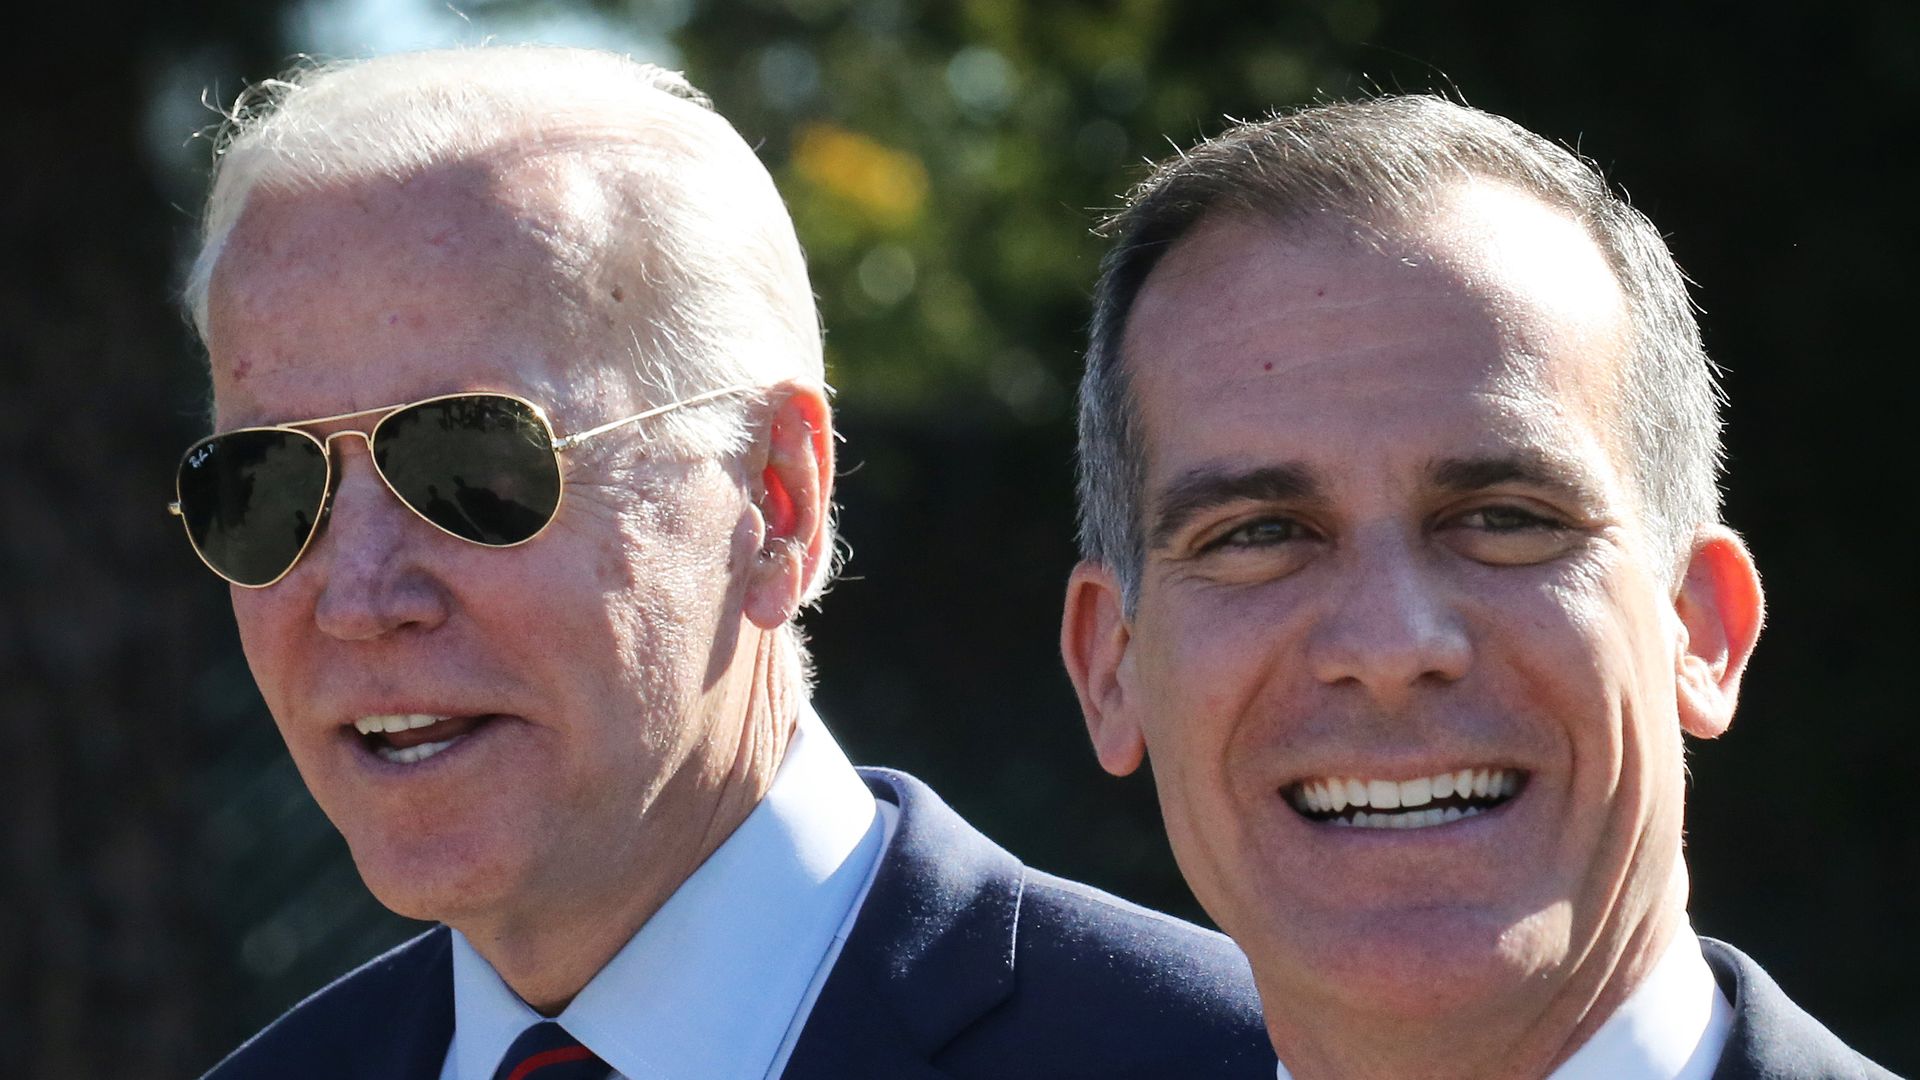 President Biden with Los Angeles Mayor Eric Garcetti in the city at in January 2020.